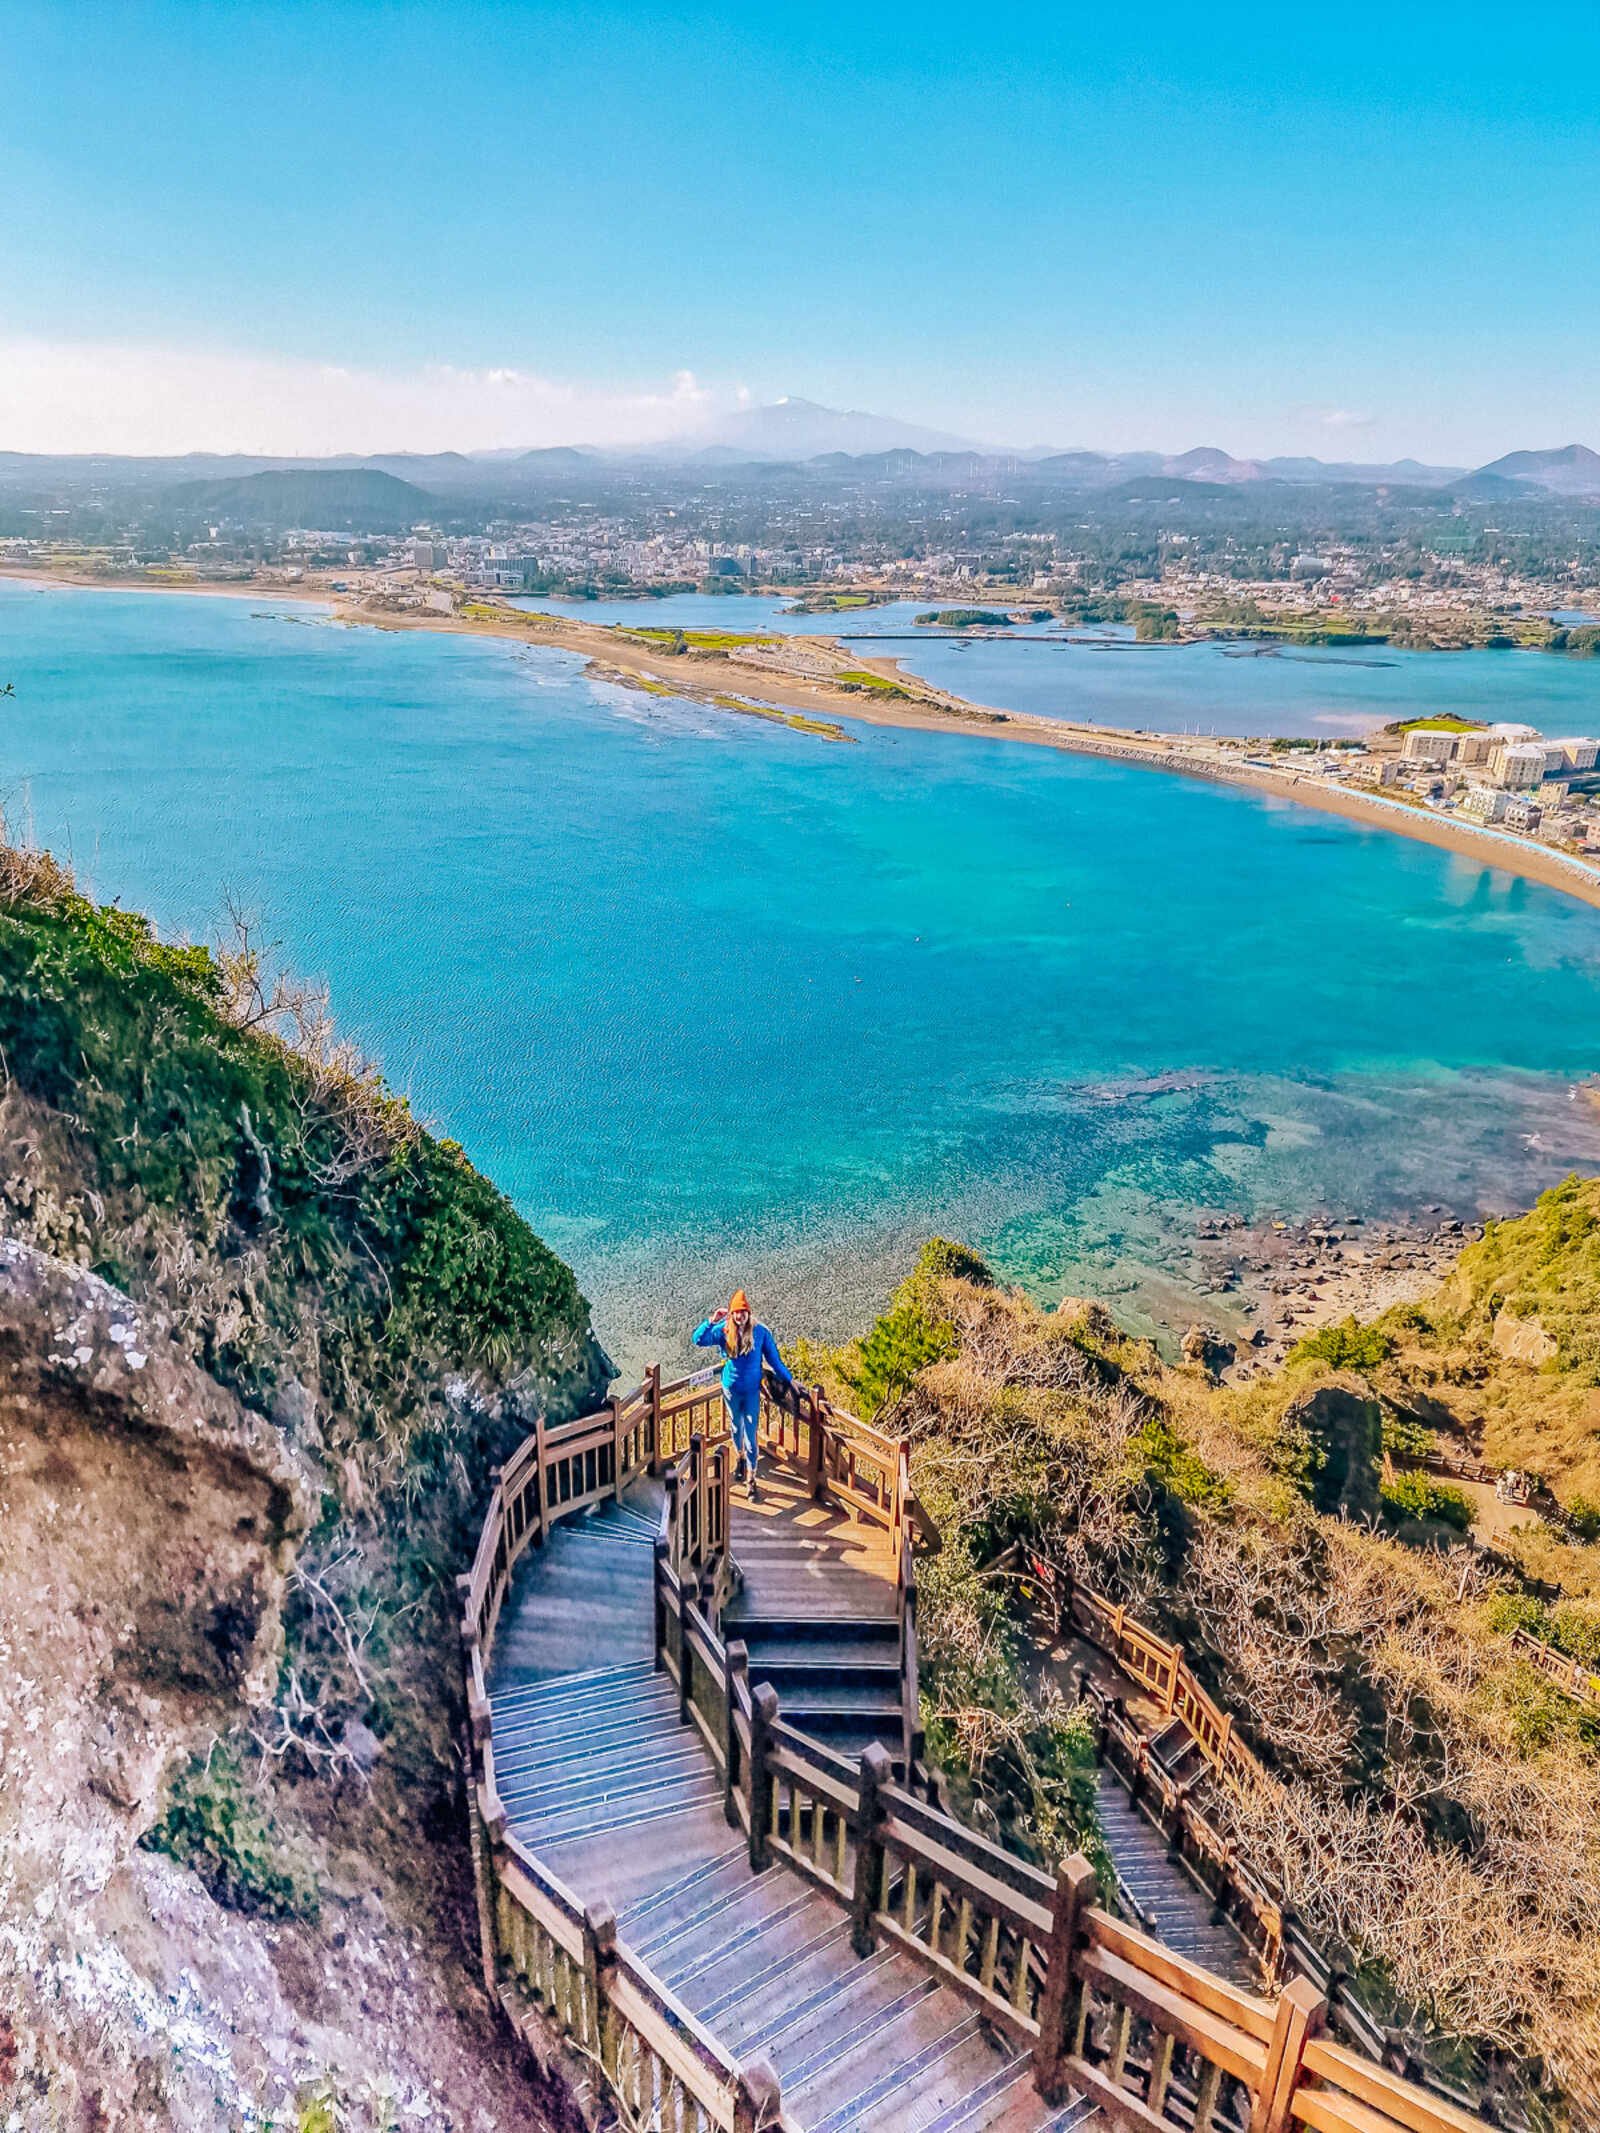 a wooden curving staircase on a cliff overlooking a turquoise blue bay